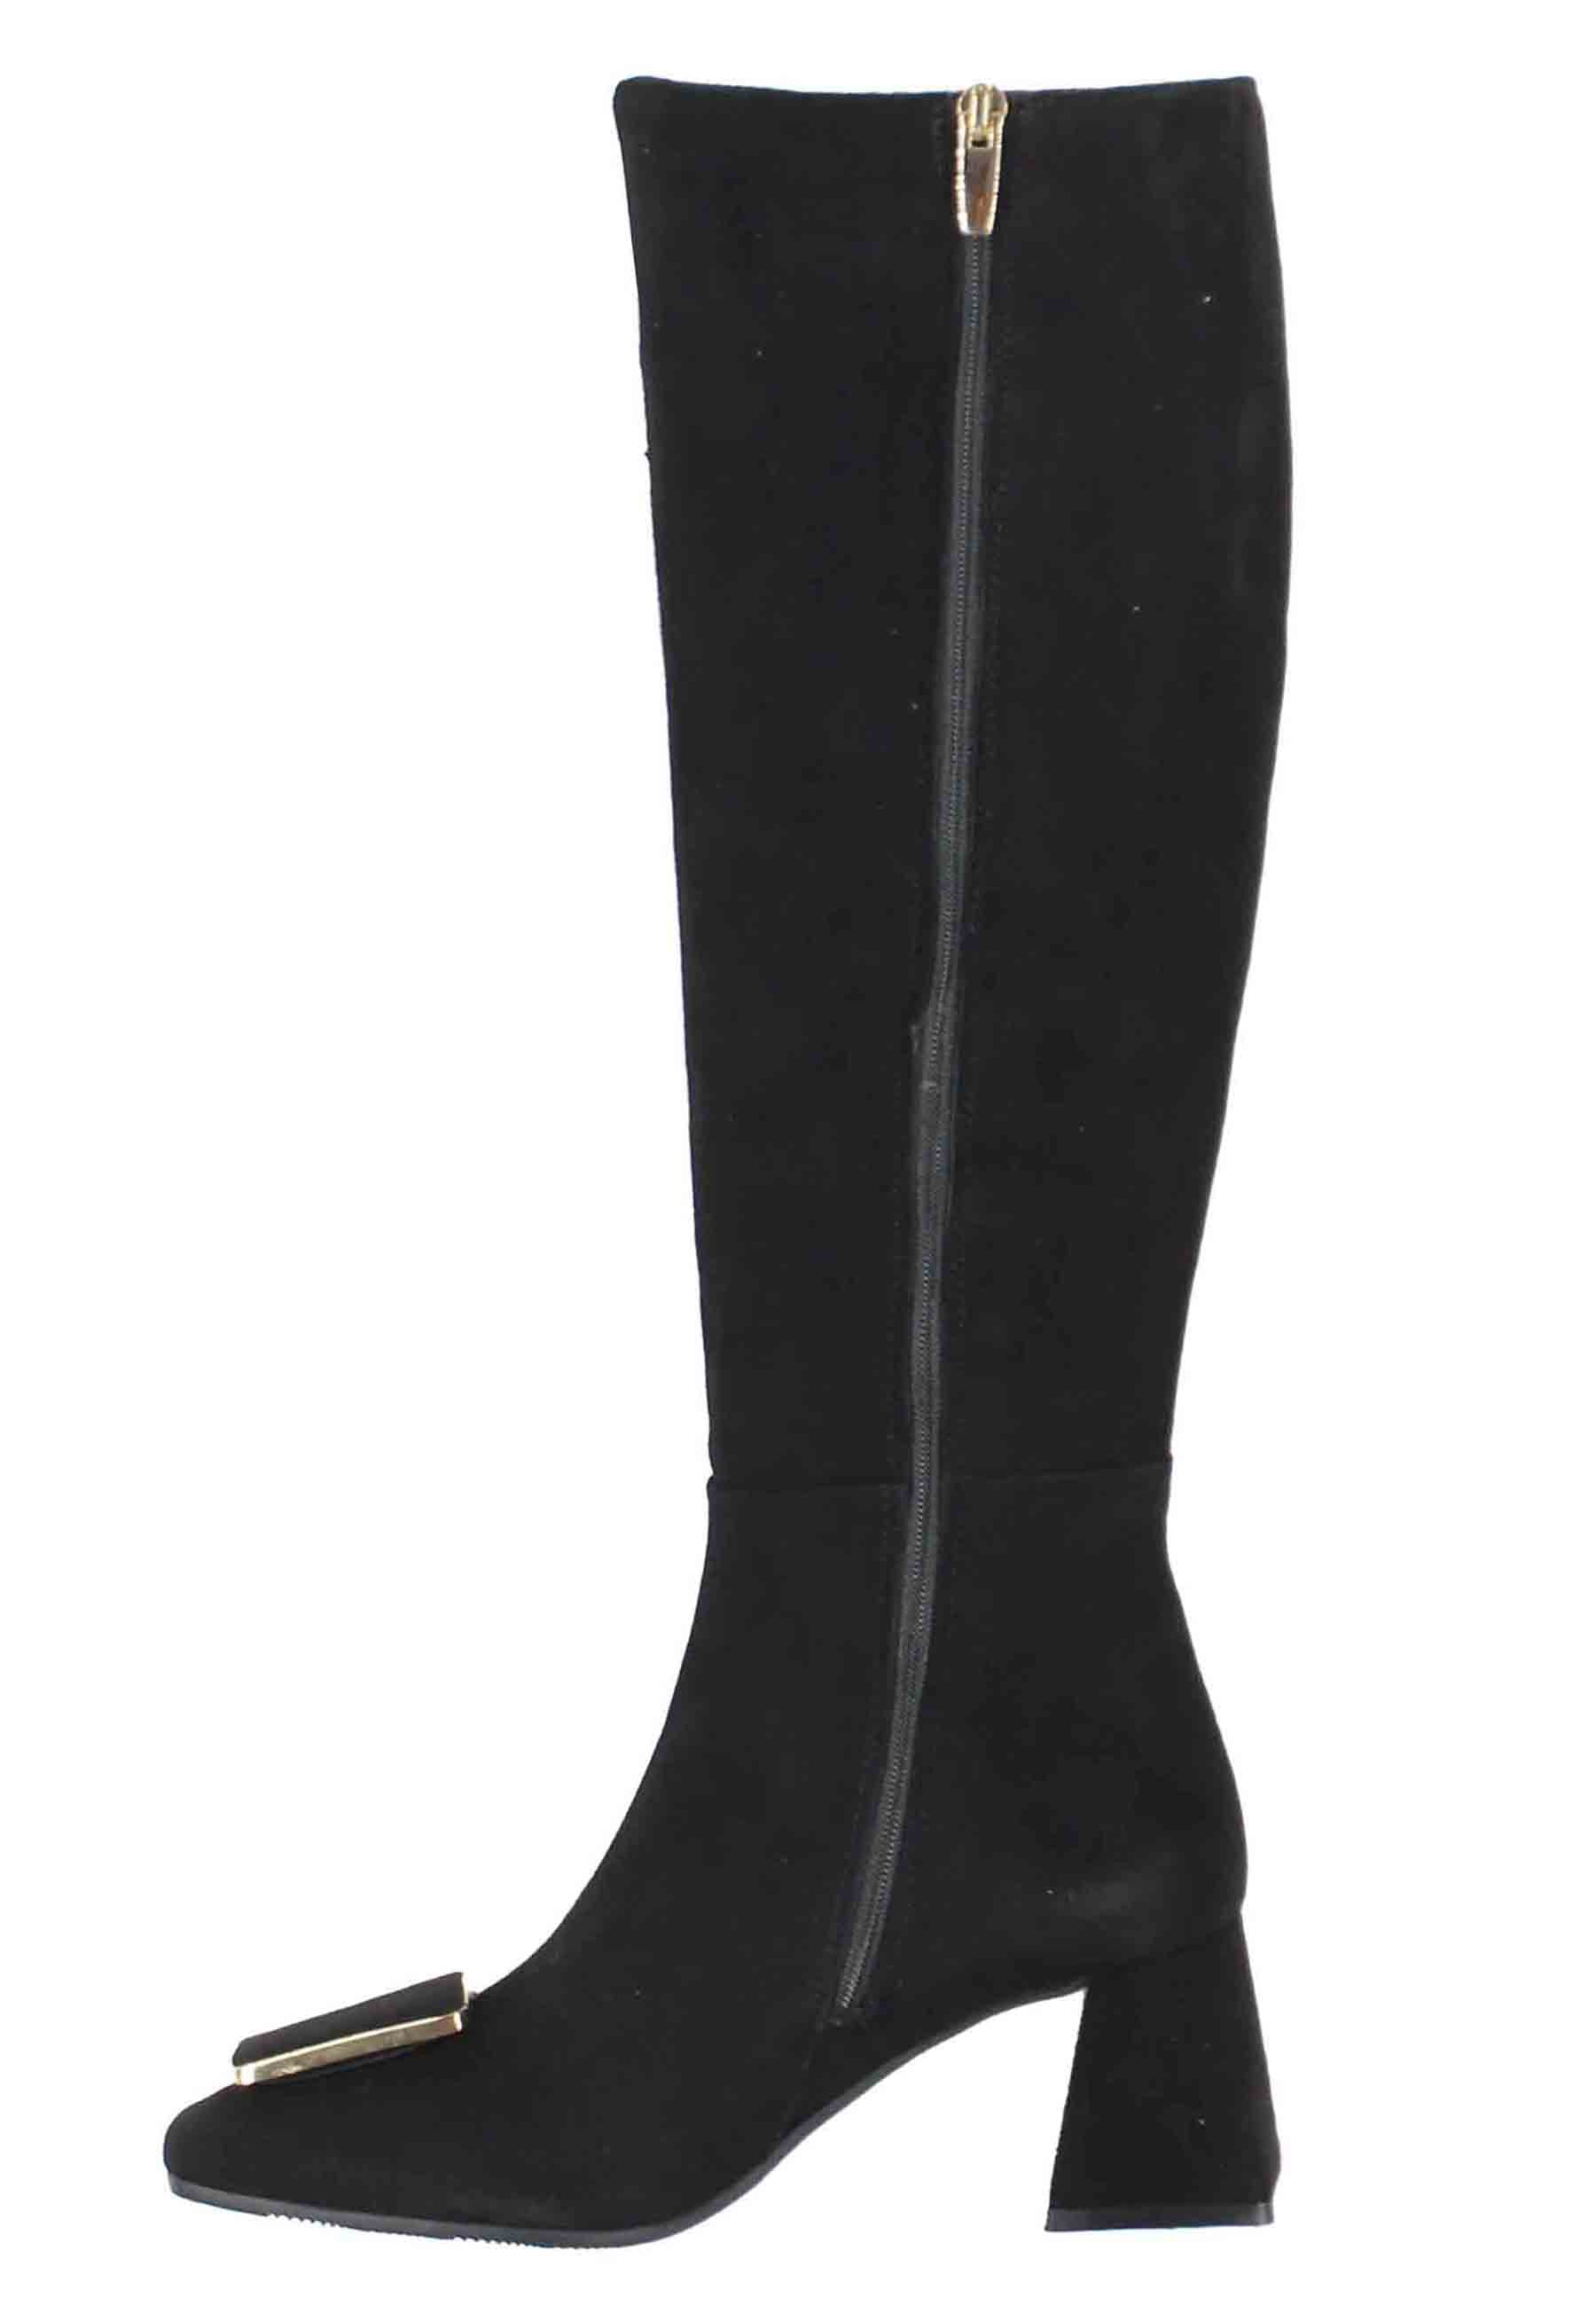 Women's boots in black suede with buckle